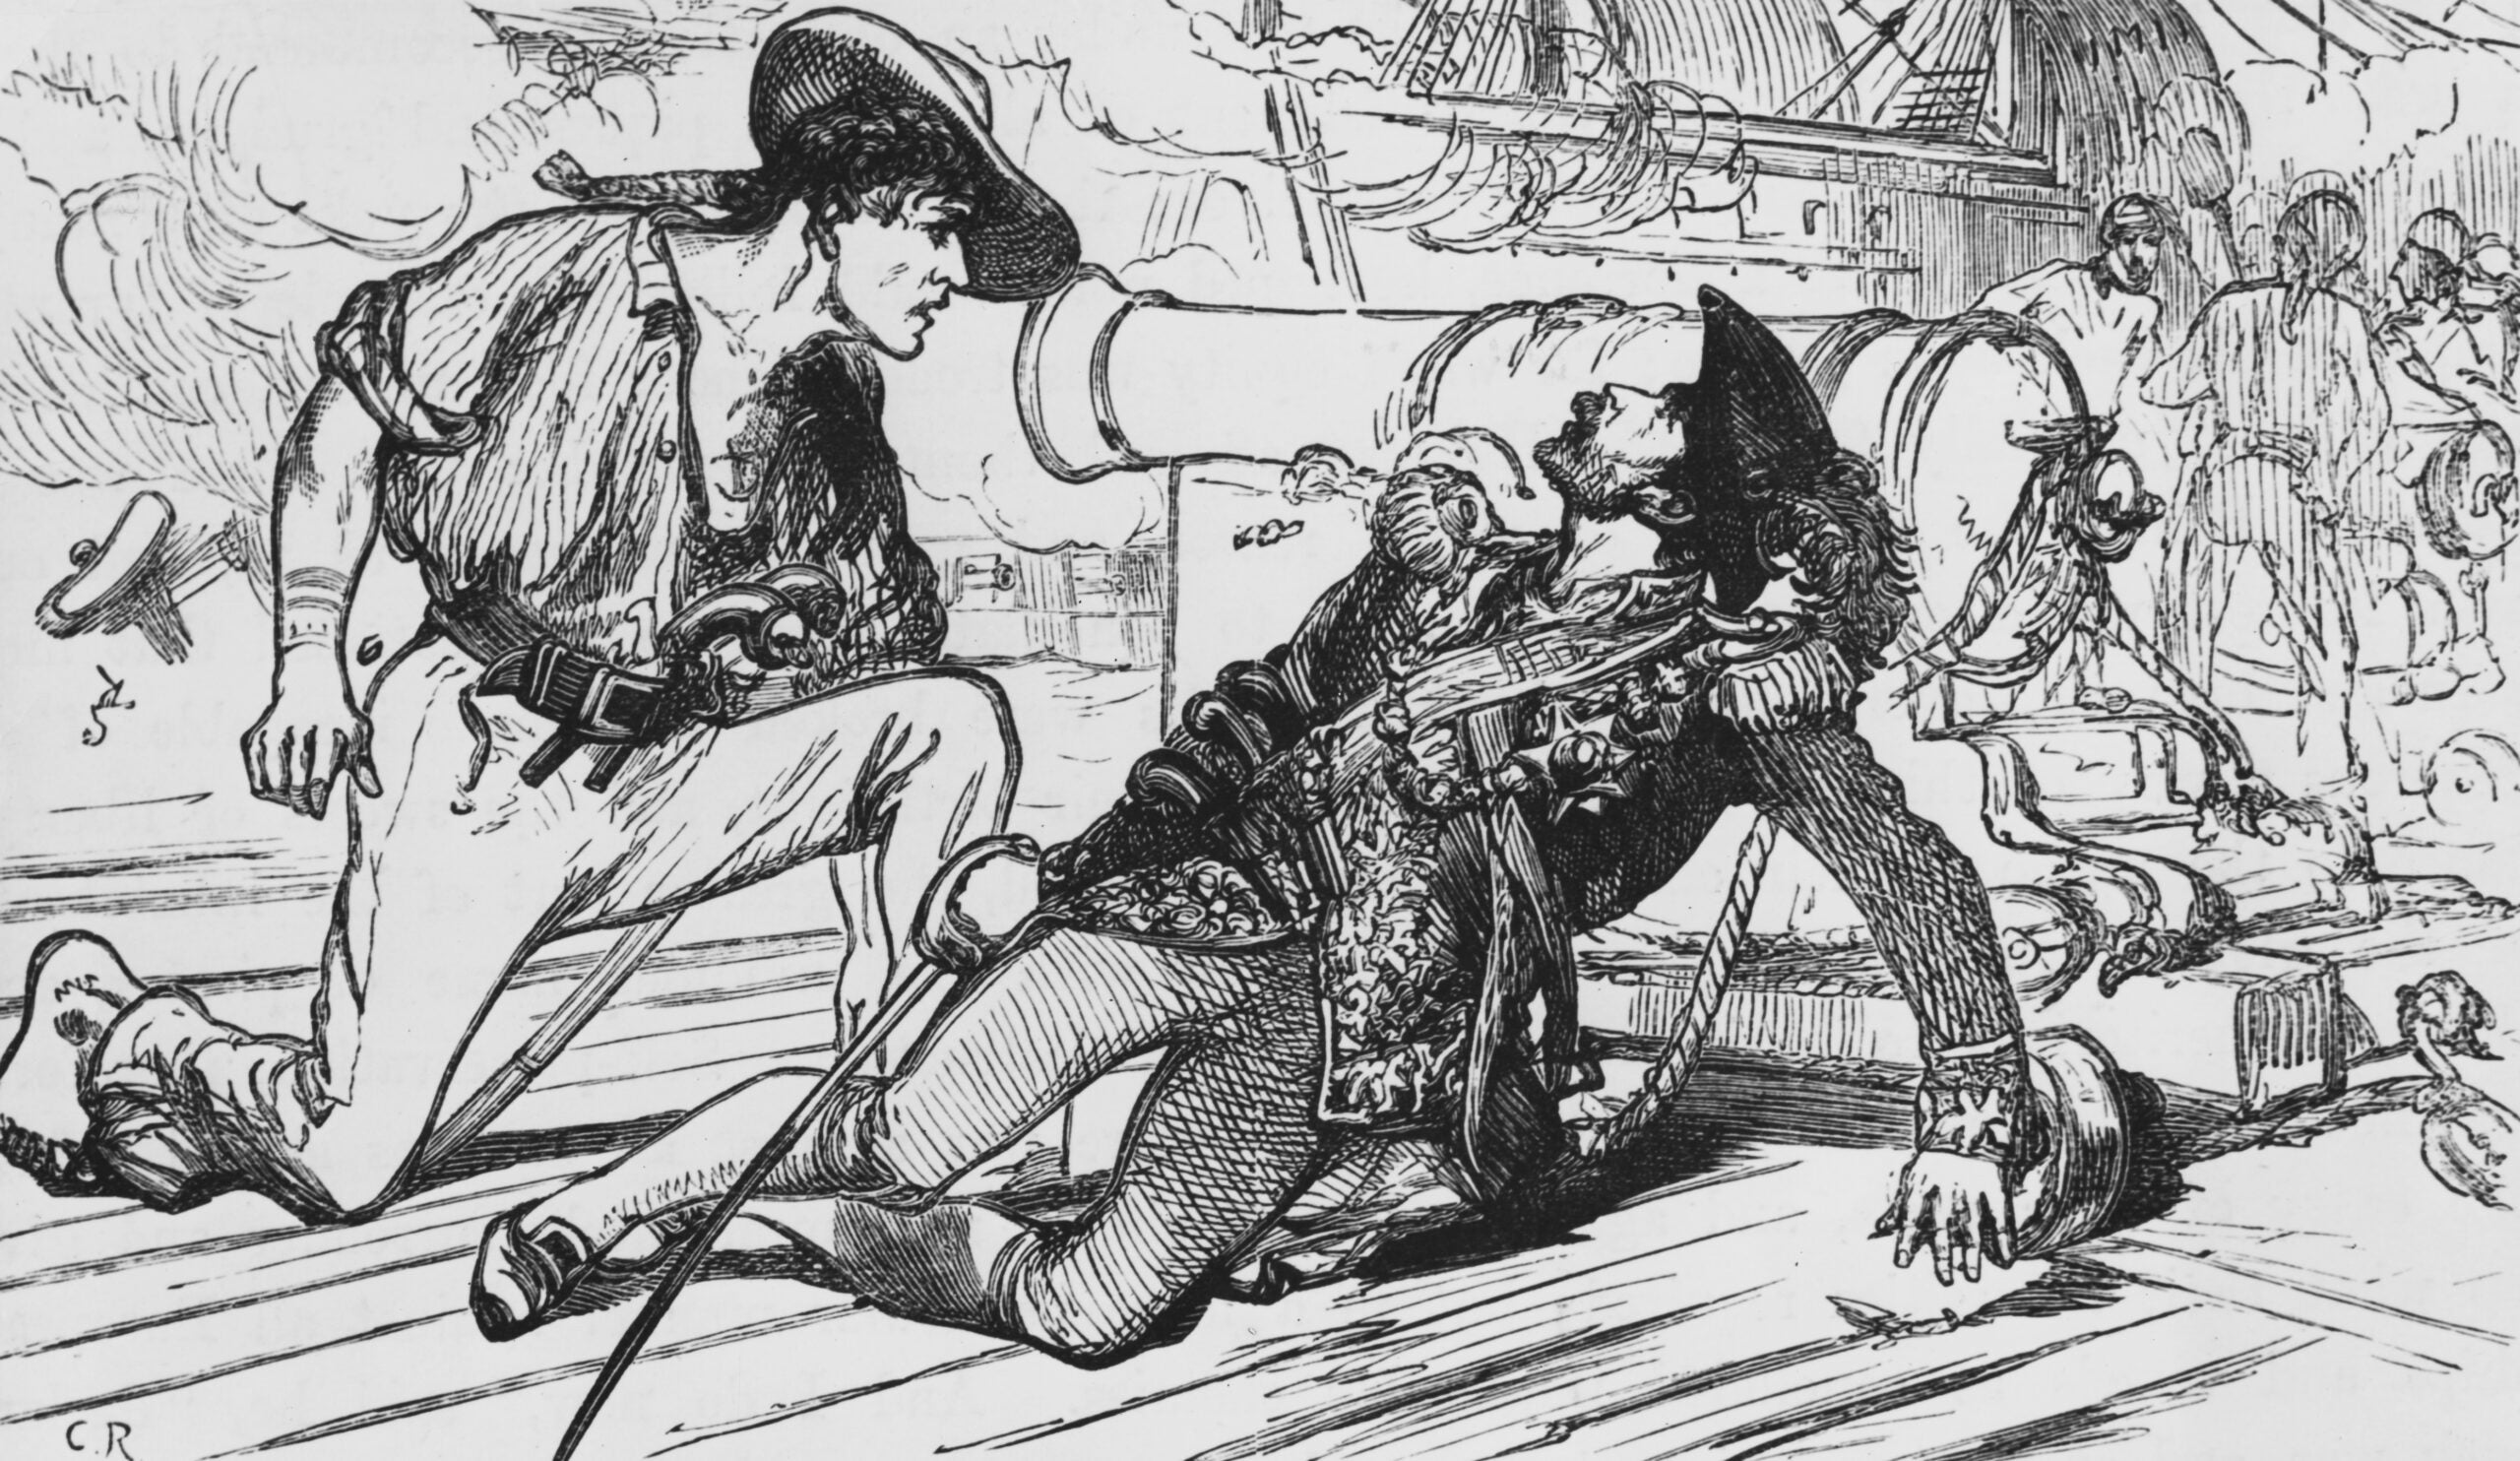 The death of Welsh pirate Bartholomew Roberts (1682 - 1722) off the coast of Gabon in west Africa, having been struck in the throat by grapeshot during a sea battle, 10th February 1722. (Photo by Hulton Archive/Getty Images)